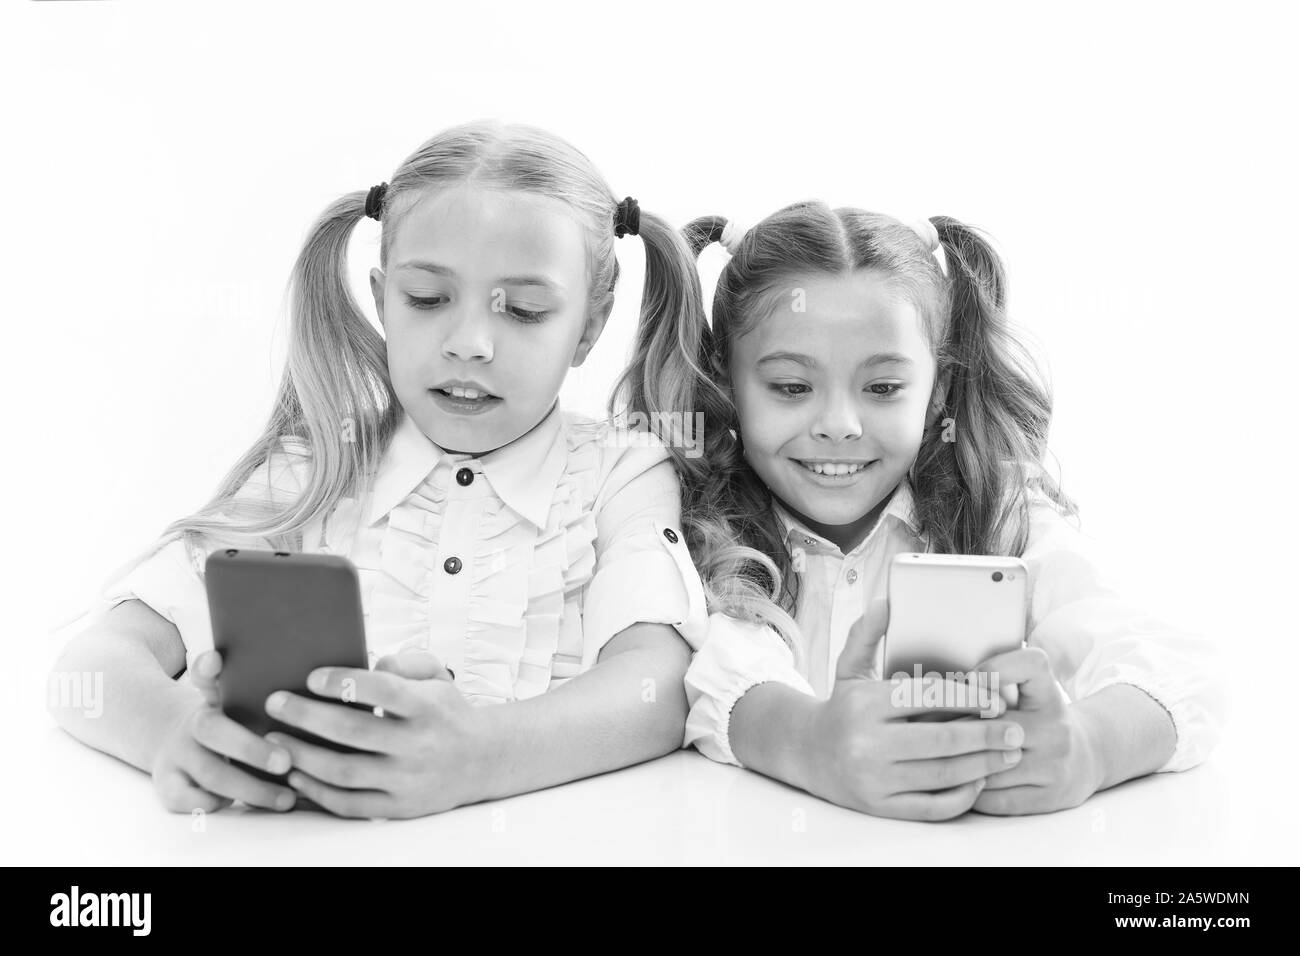 Smart pupils. Little pupils texting message during class isolated on white. Cute lyceum pupils diving deep into smartphone lessons. Small pupils using mobile phones in classroom. Stock Photo